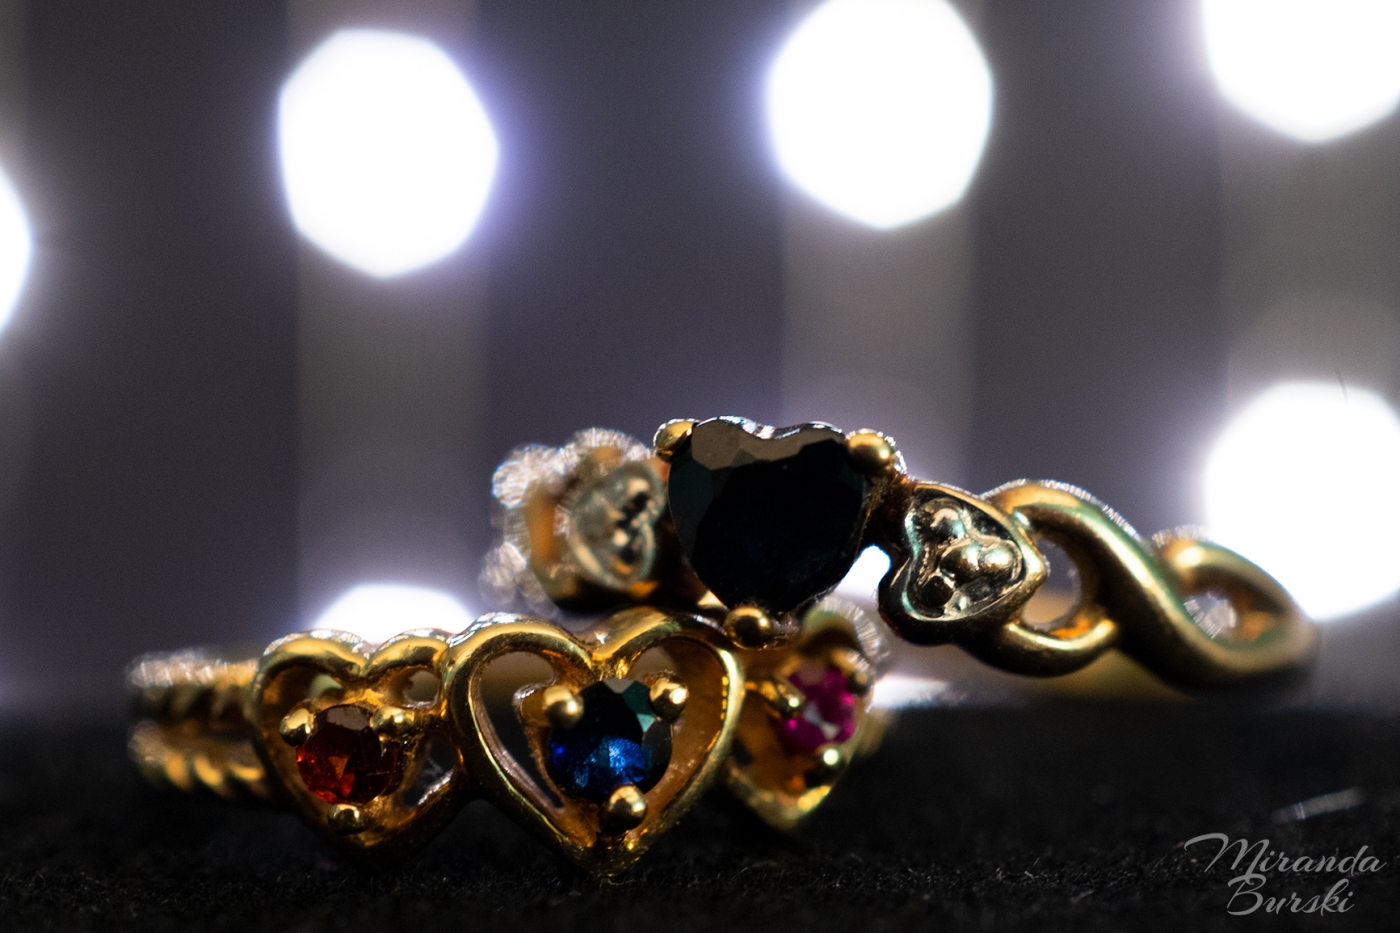 Two gold rings with sapphires and other gems